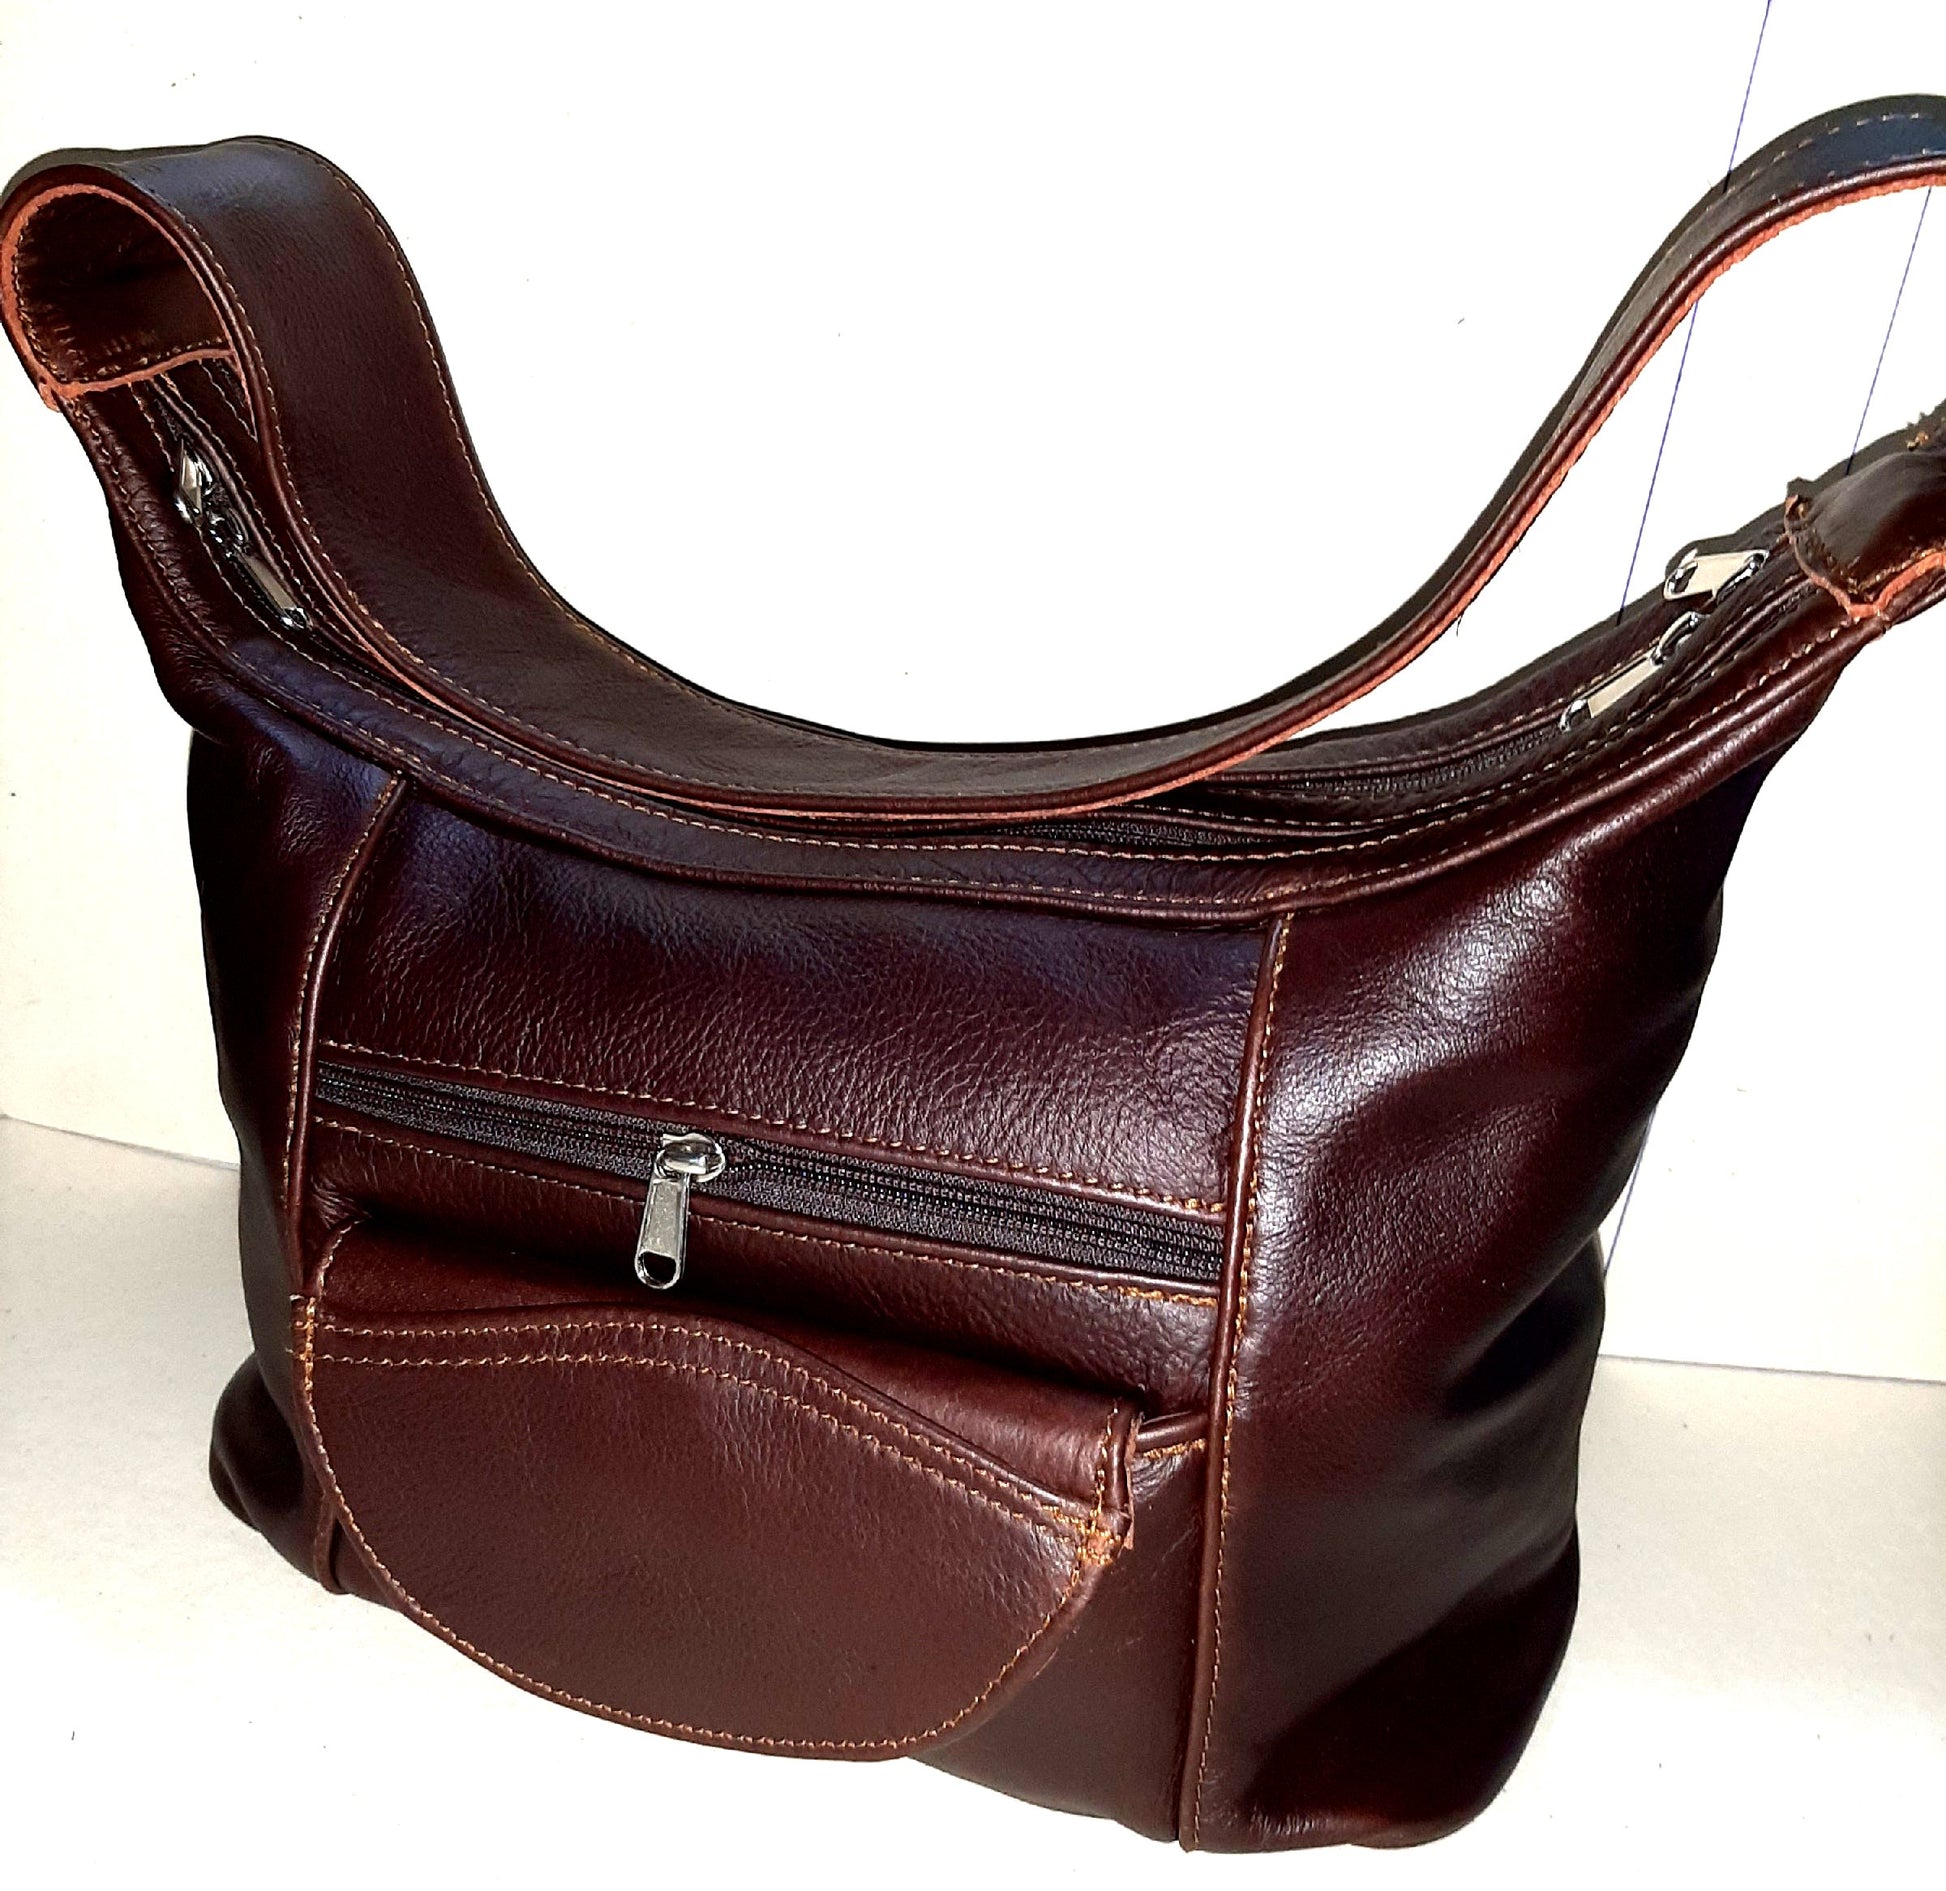 Gb7 leather bags with flap - cape Masai leather 